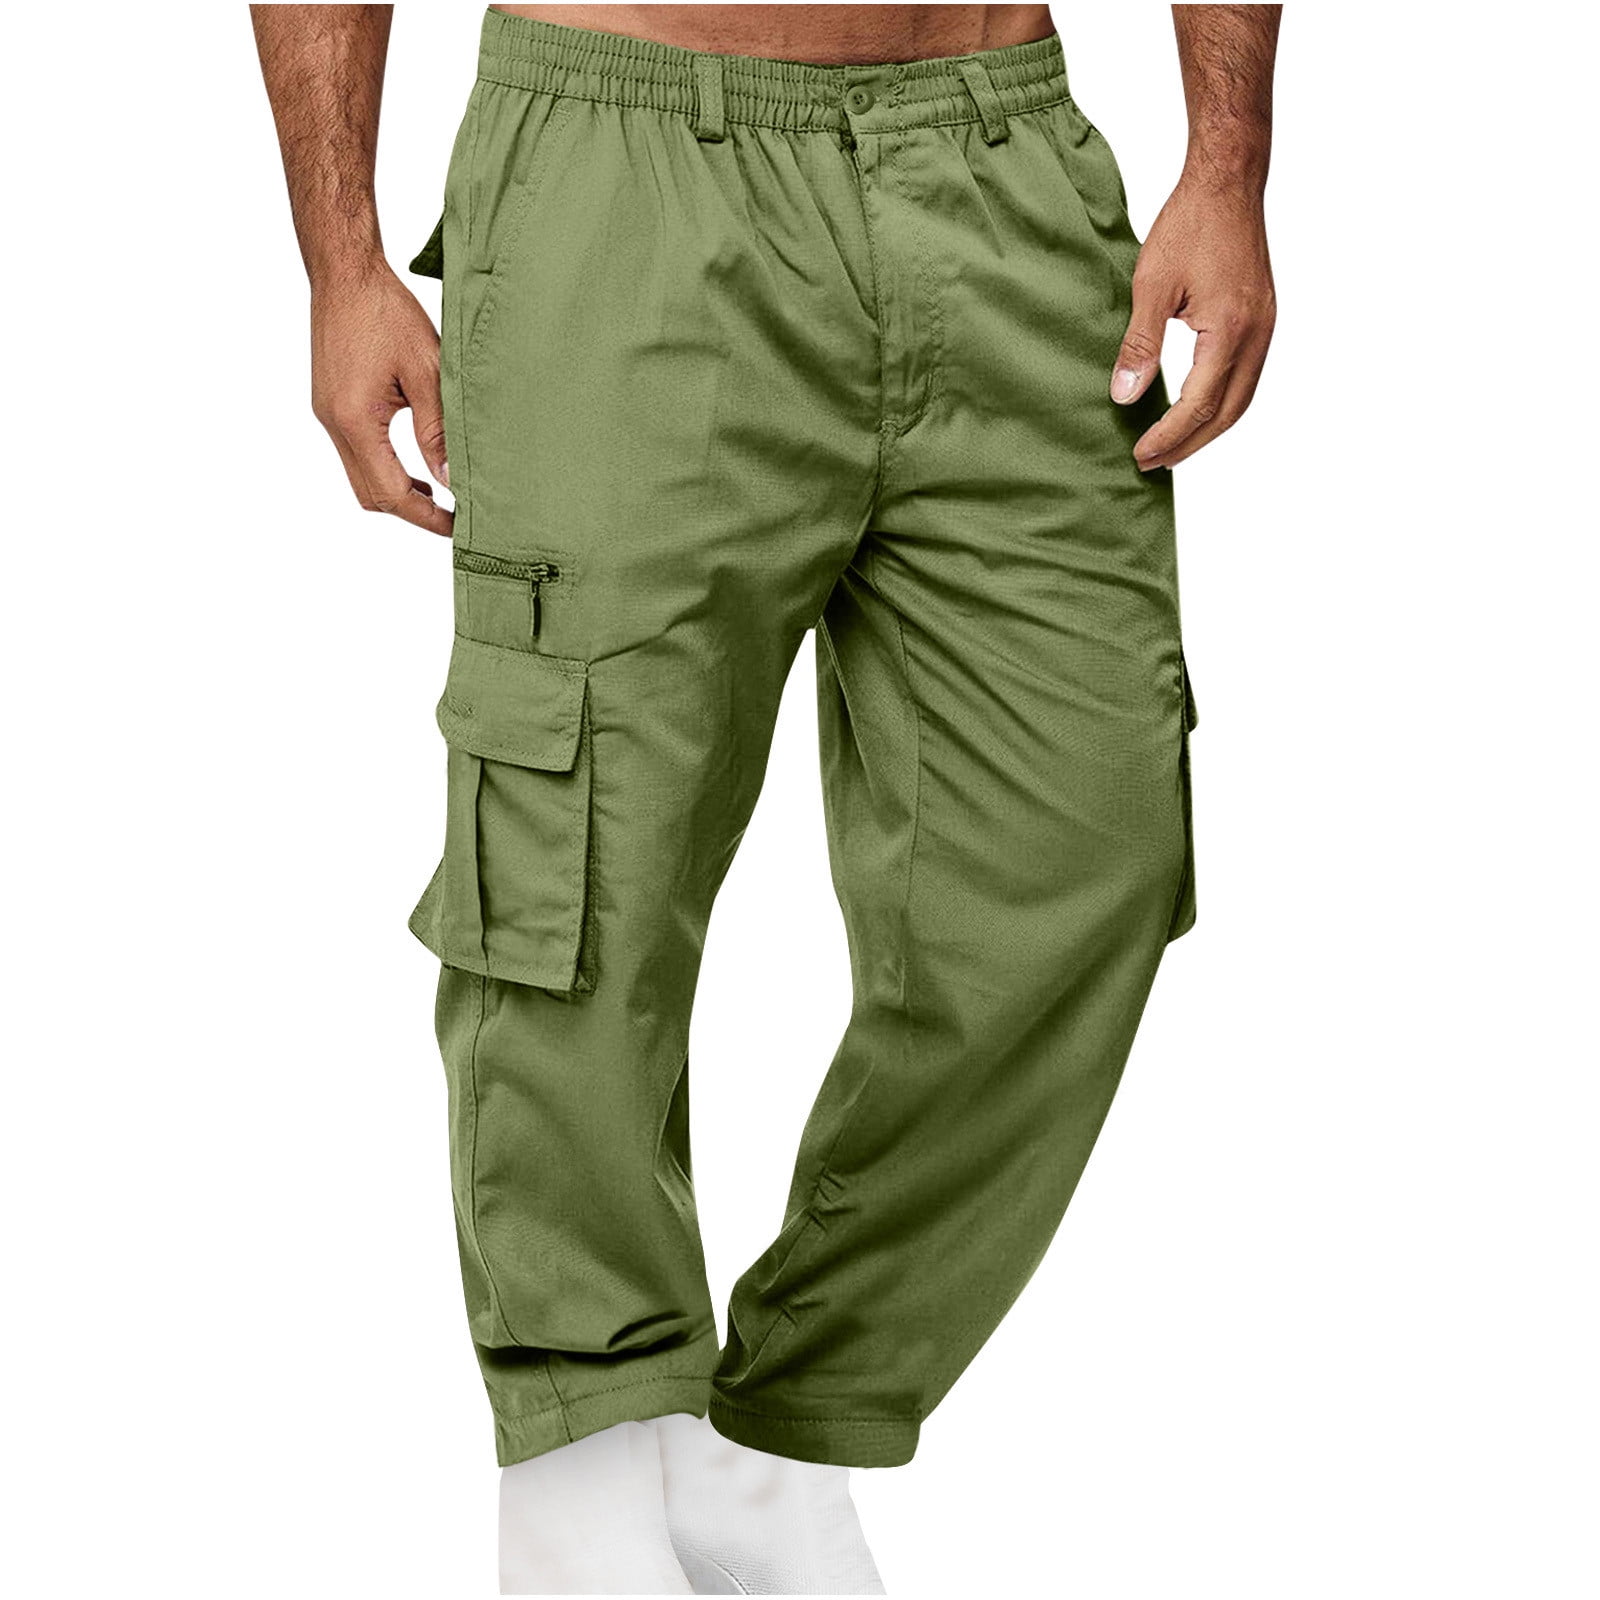 Ayolanni Army Green Cargo Pants for Mens Loose Twill Trouser with Multi ...